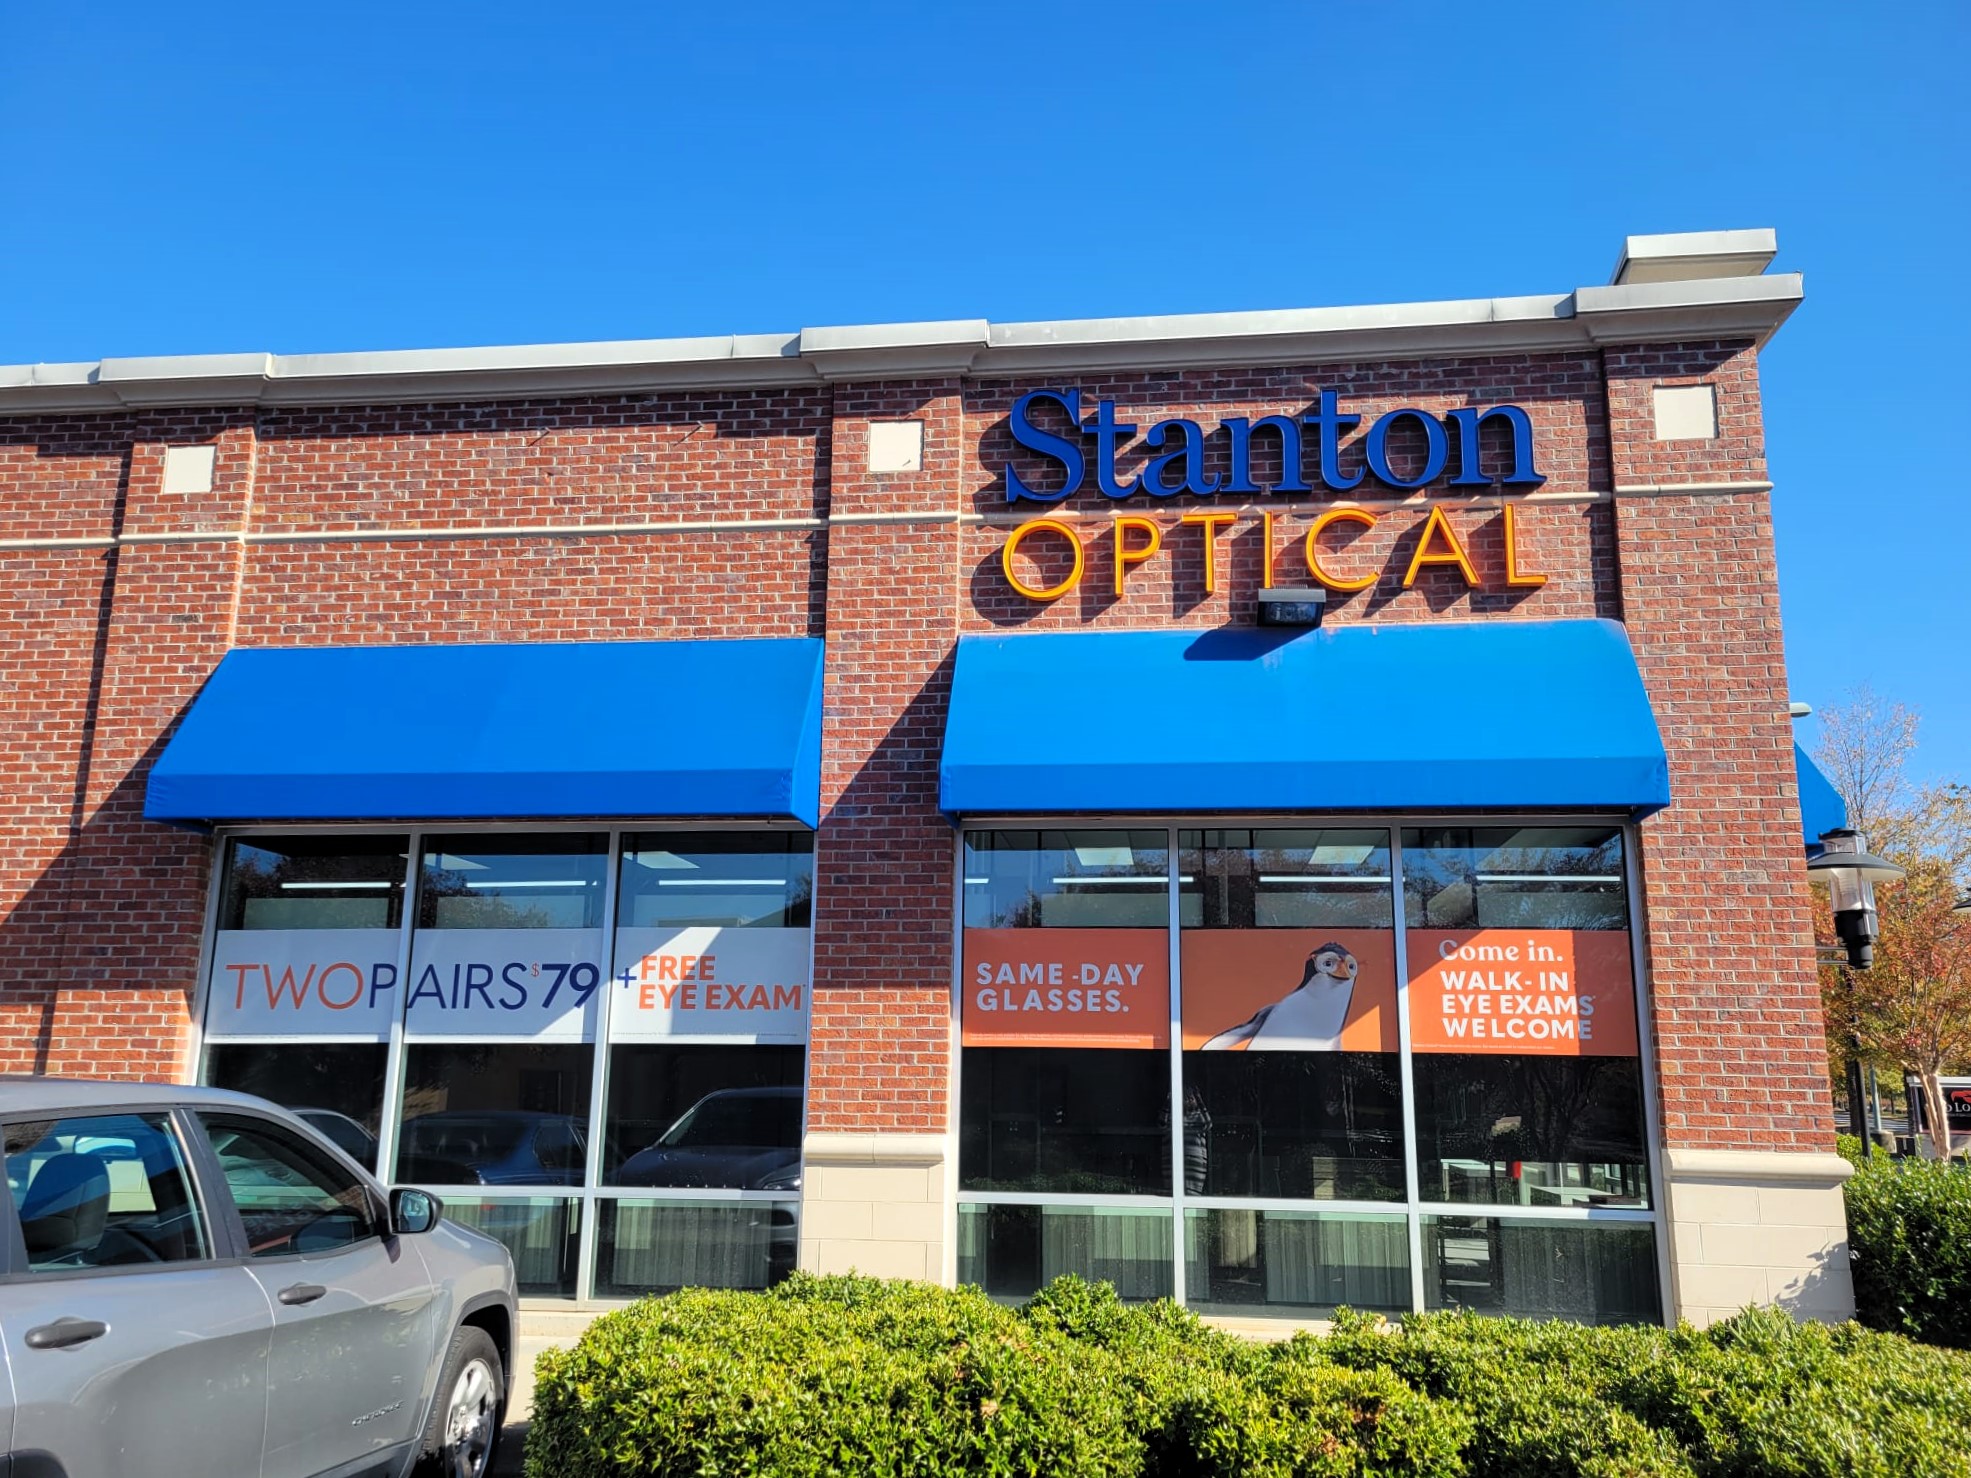 Storefront at Stanton Optical store in Buford, GA 30519